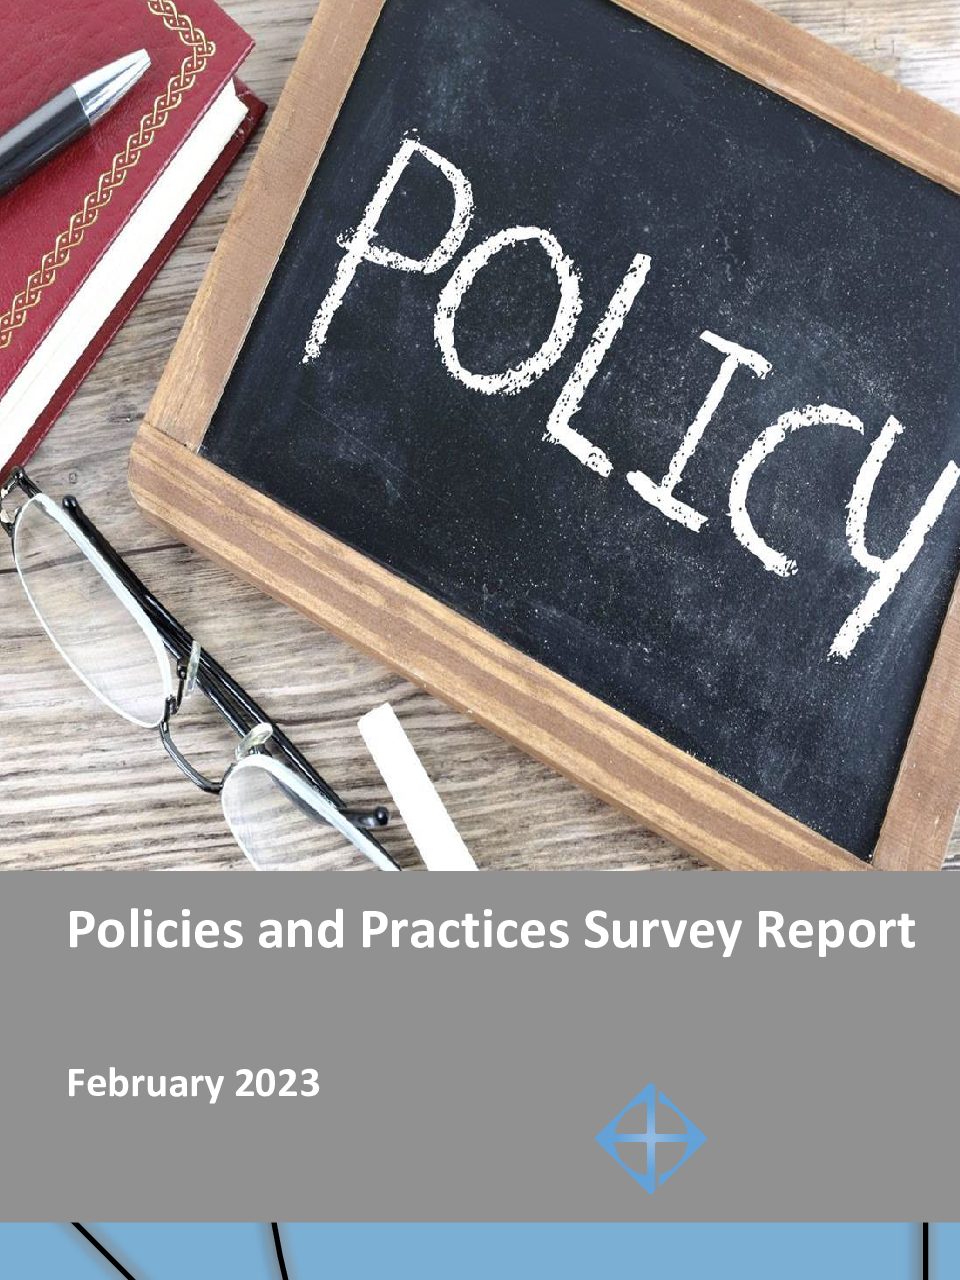 2022 Policies and Practices Survey